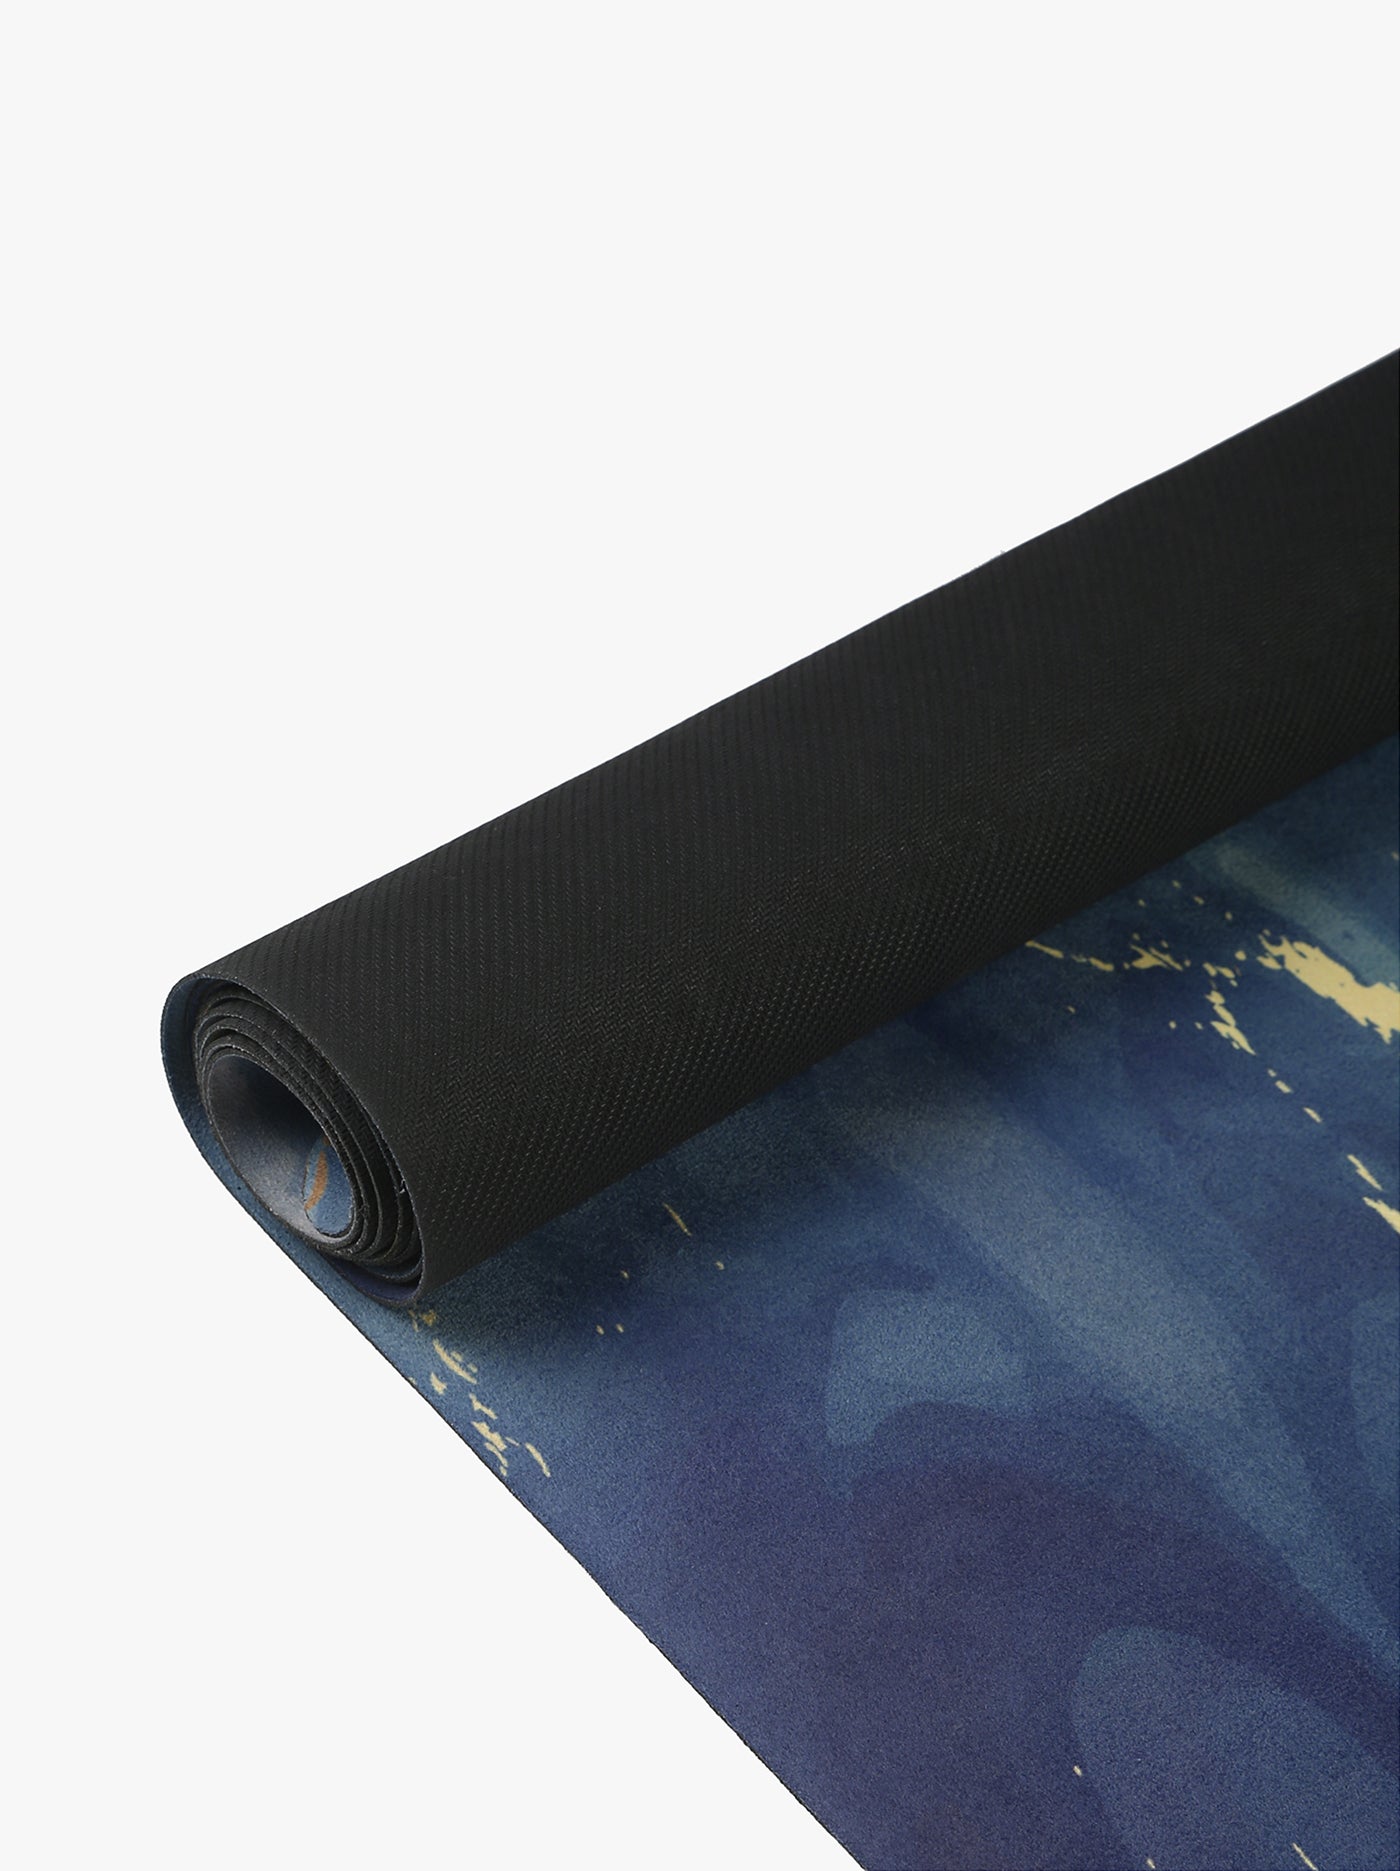 Ajna Rubber Yoga Mat. Eco-friendly, with recycled microfiber suede and sustainable tree rubber, it offers excellent cushioning, and a non-slip grip, that is activated more with sweat. Immerse in a fusion of design and functionality.